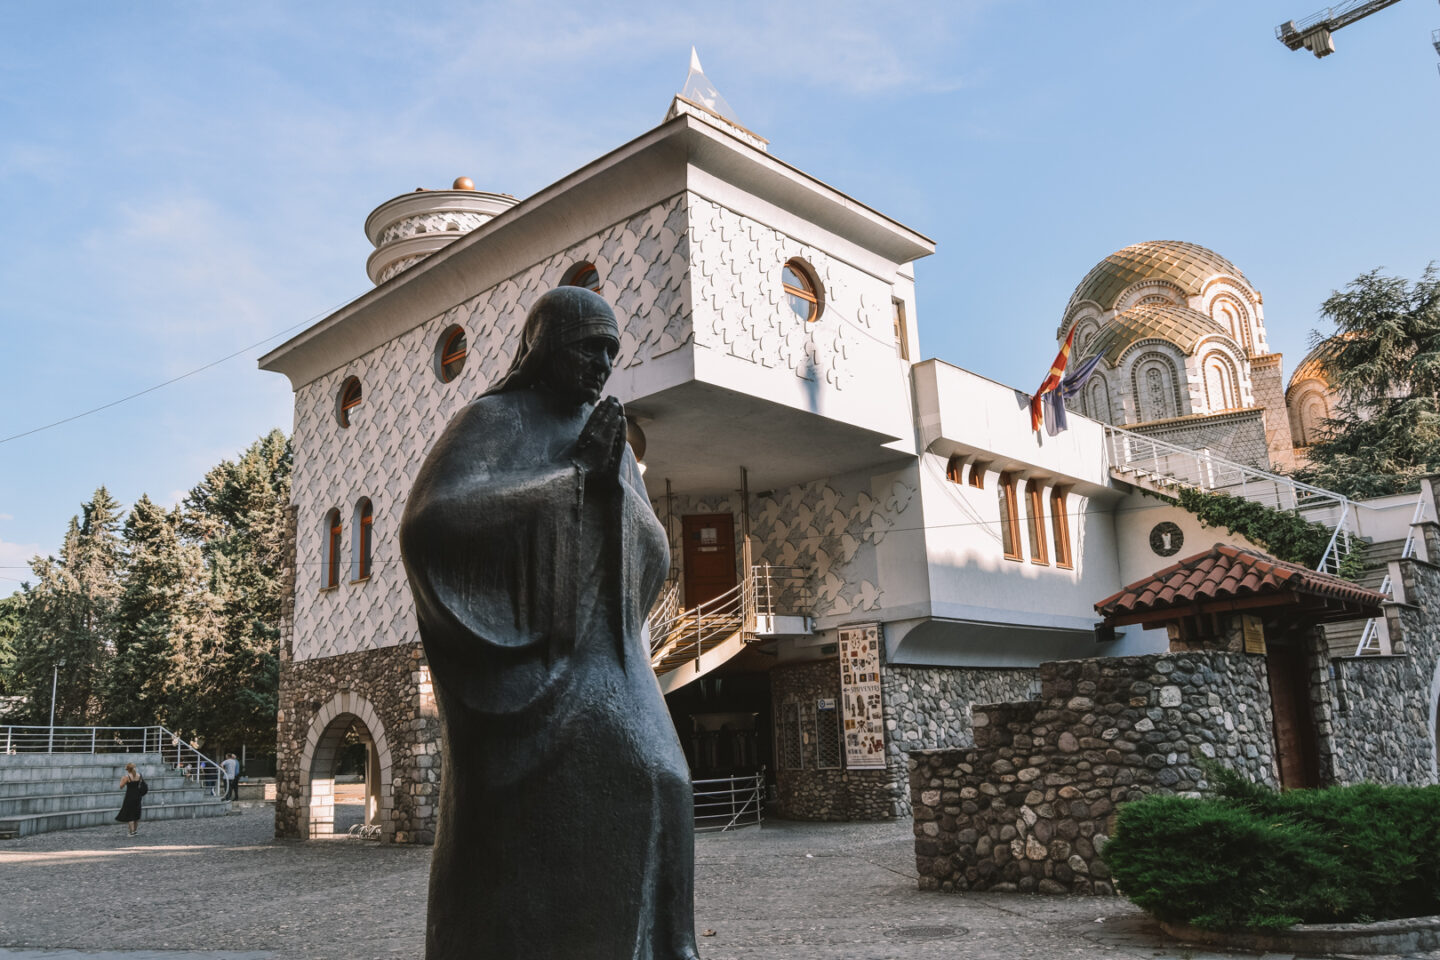 Things to see in Skopje, North Macedonia - Visit the Memorial House of Mother Teresa